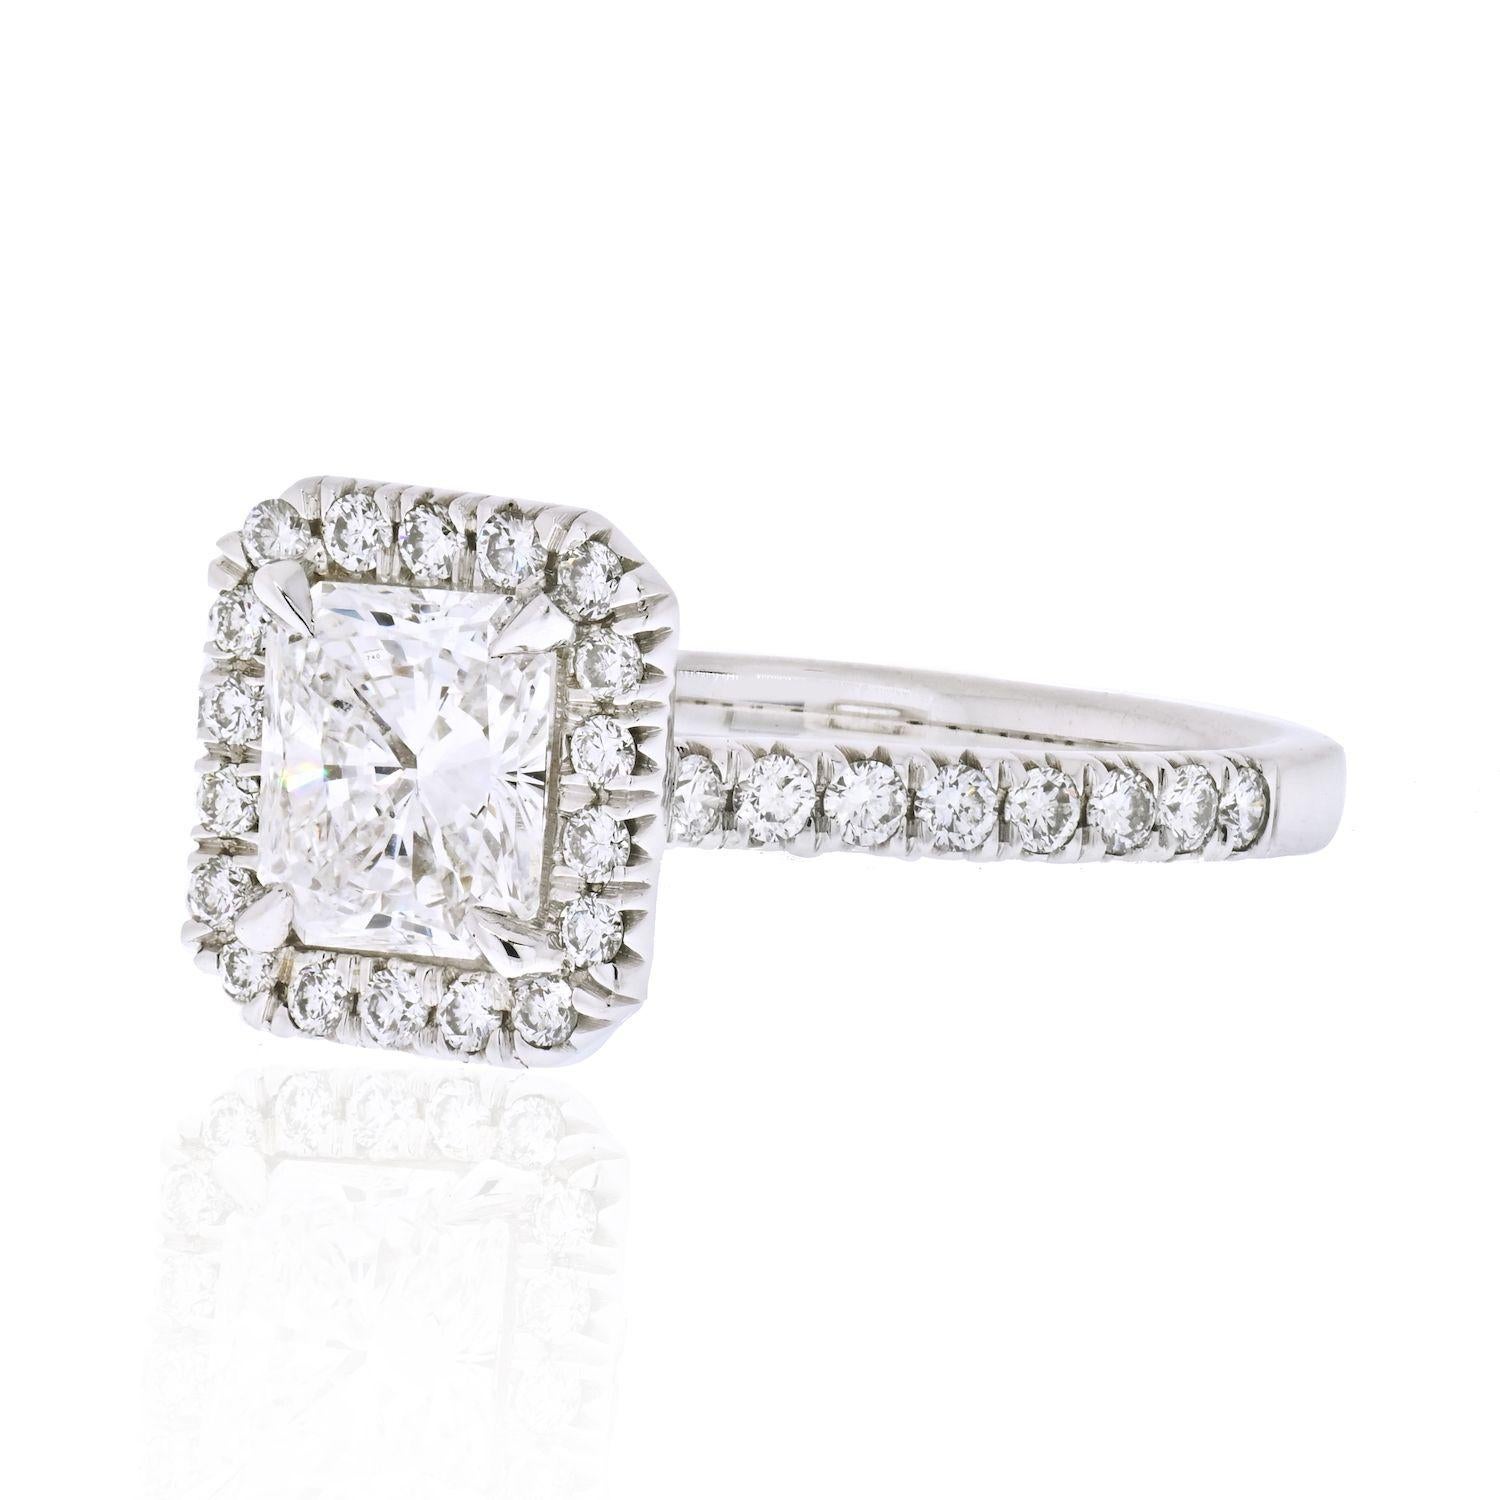 Halo set diamond engagement rings have always been in style. People say it's just a fad but we say it's a style that is here to stay. There are a few things that this ring has going for it: center diamond is a full carat, it is of a colorless grade,